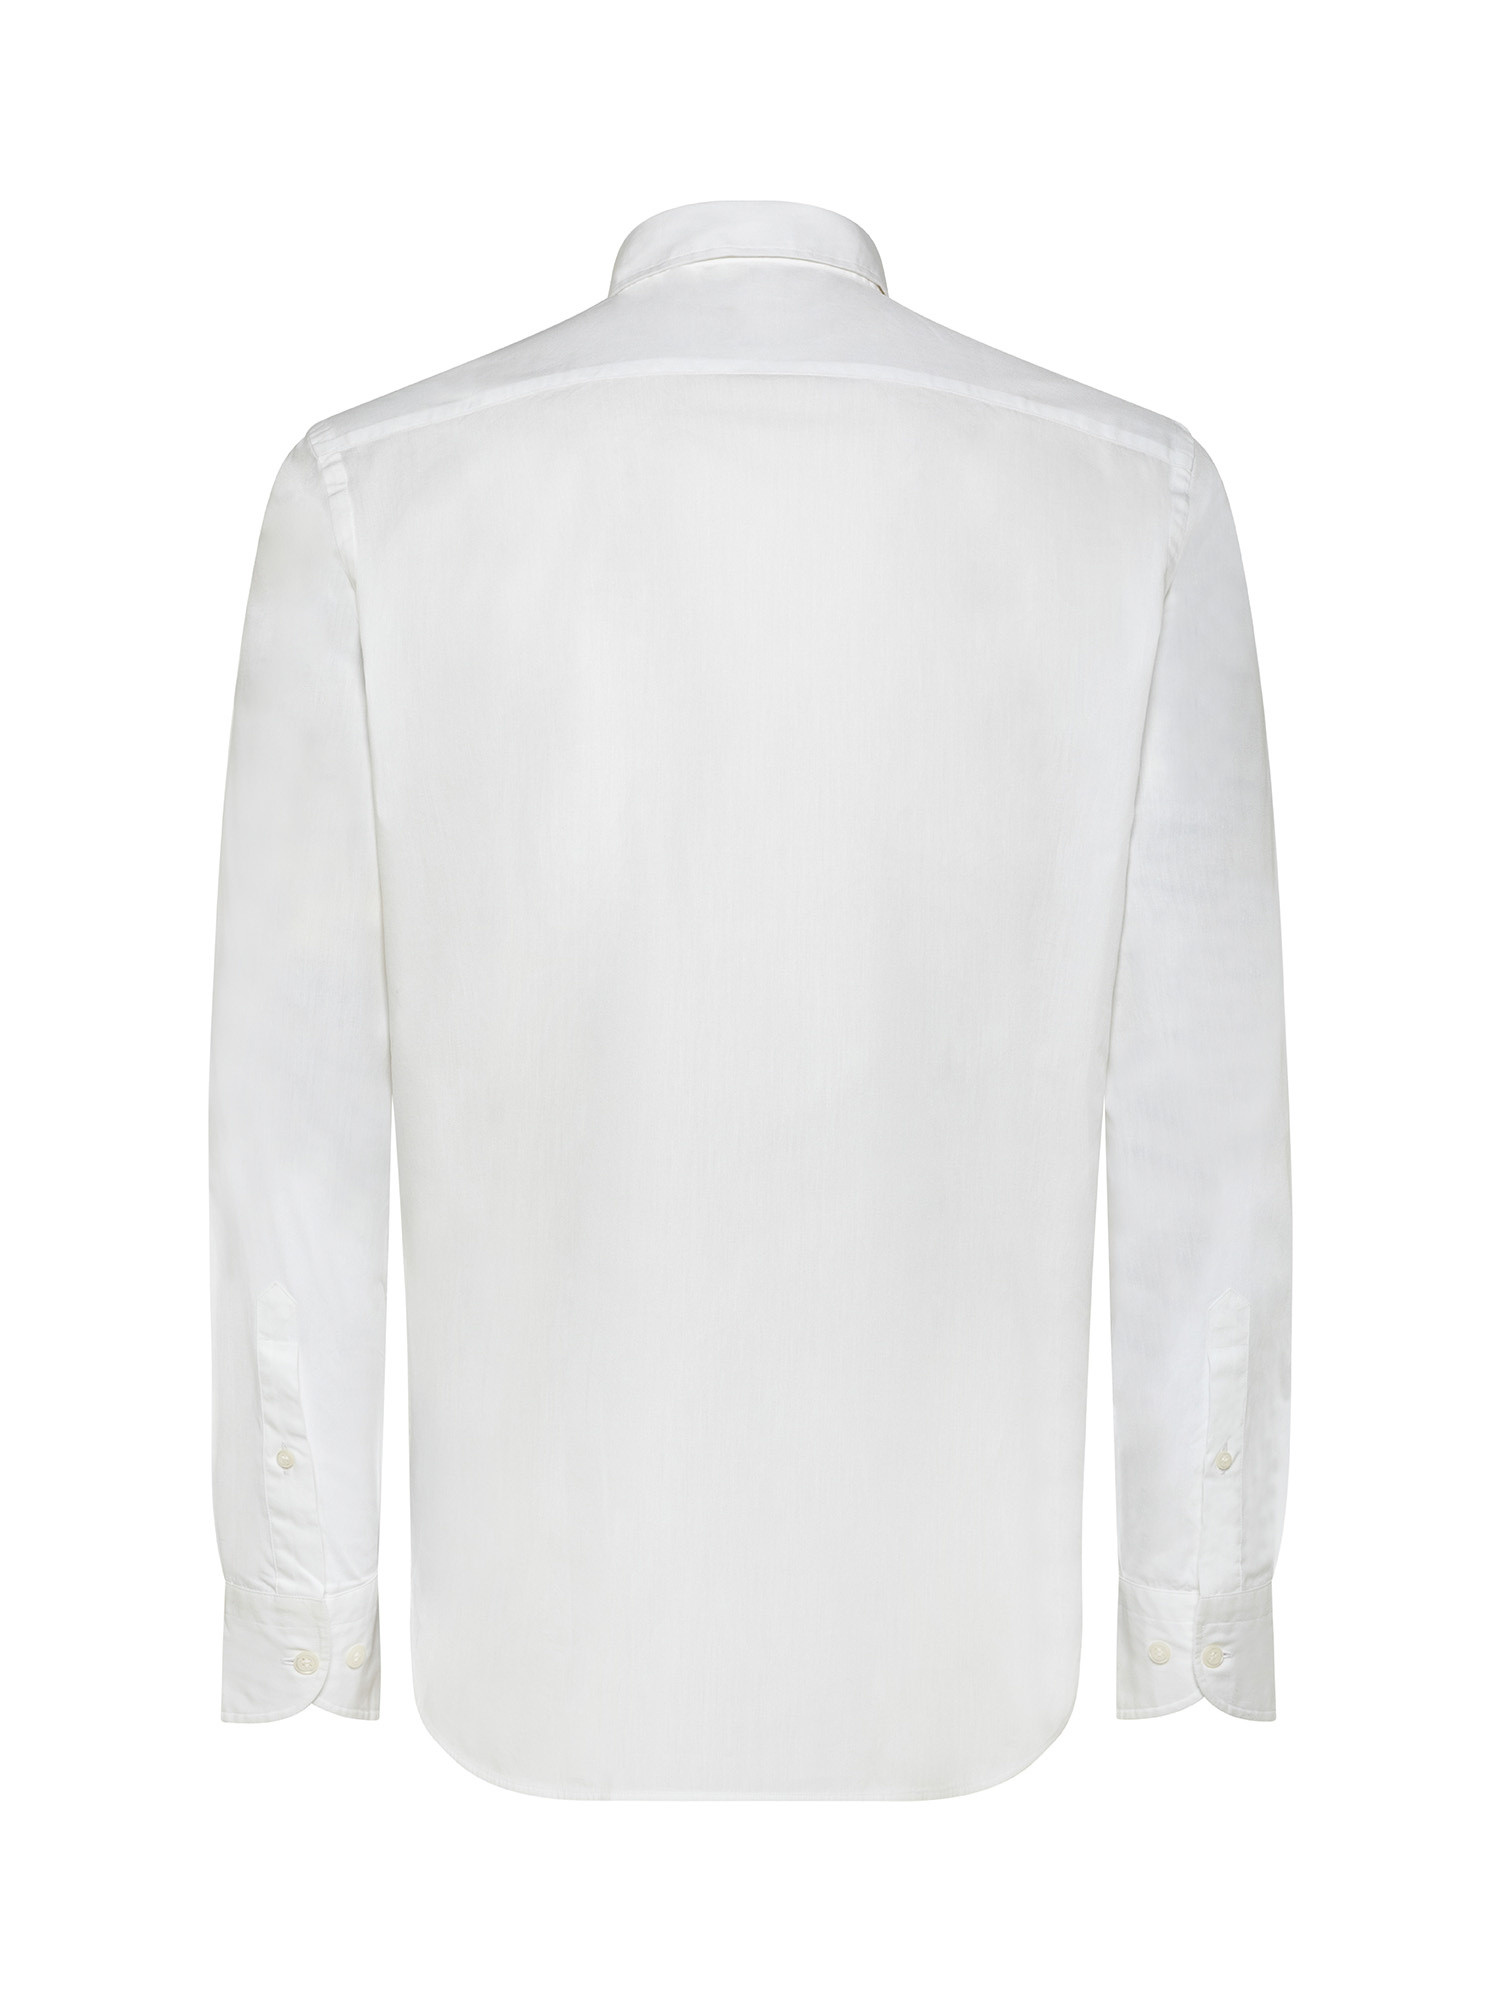 Basic slim fit shirt in pure cotton, White, large image number 2